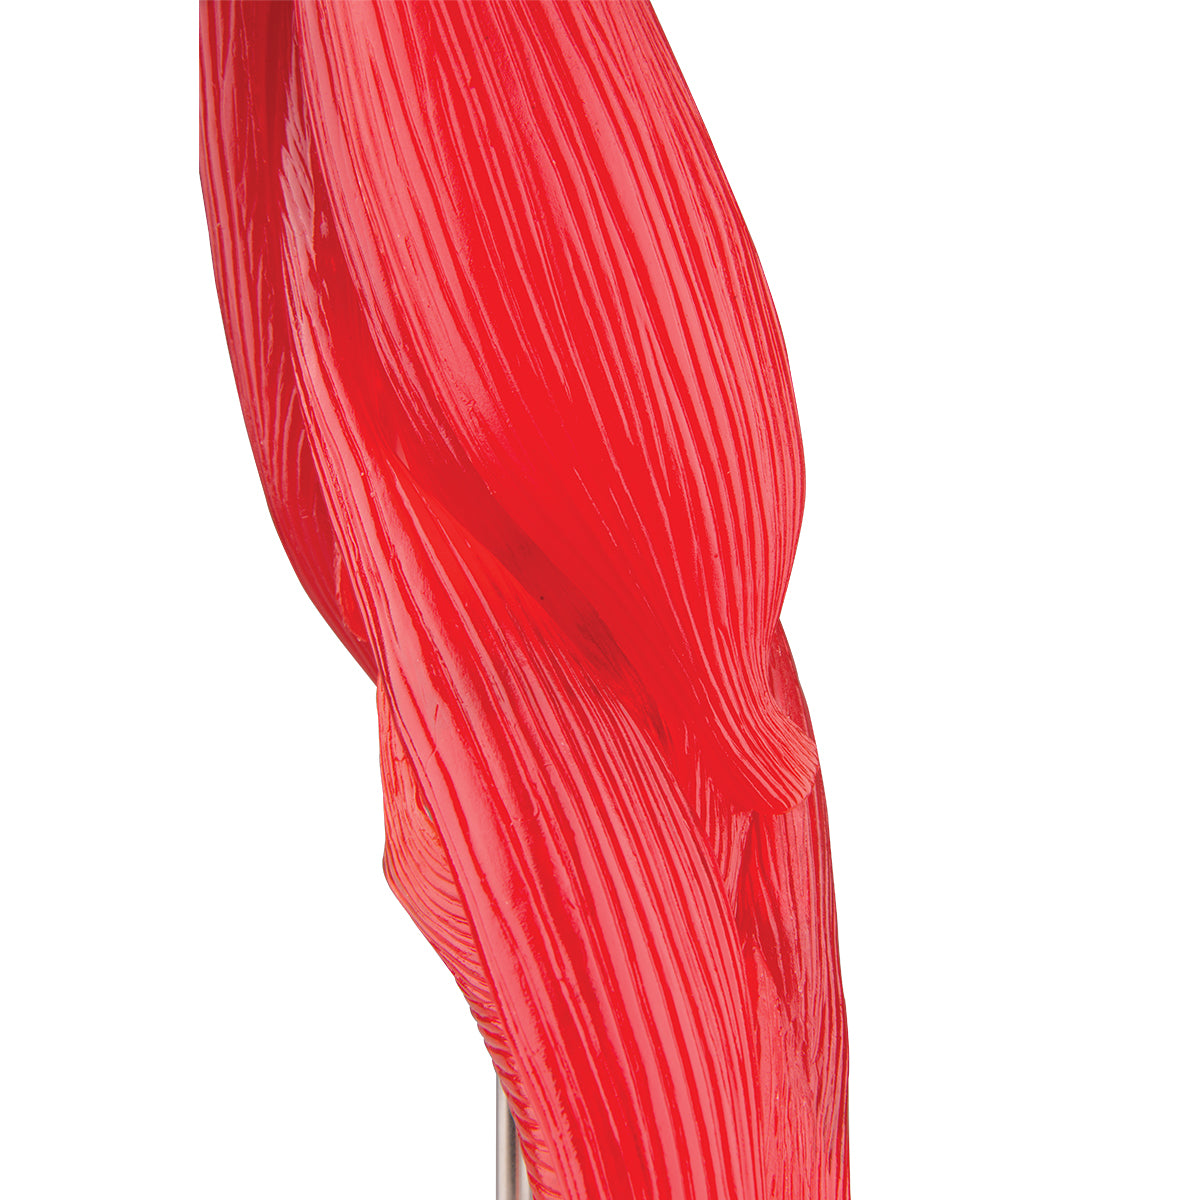 Flexible elbow model with many muscles which can be removed